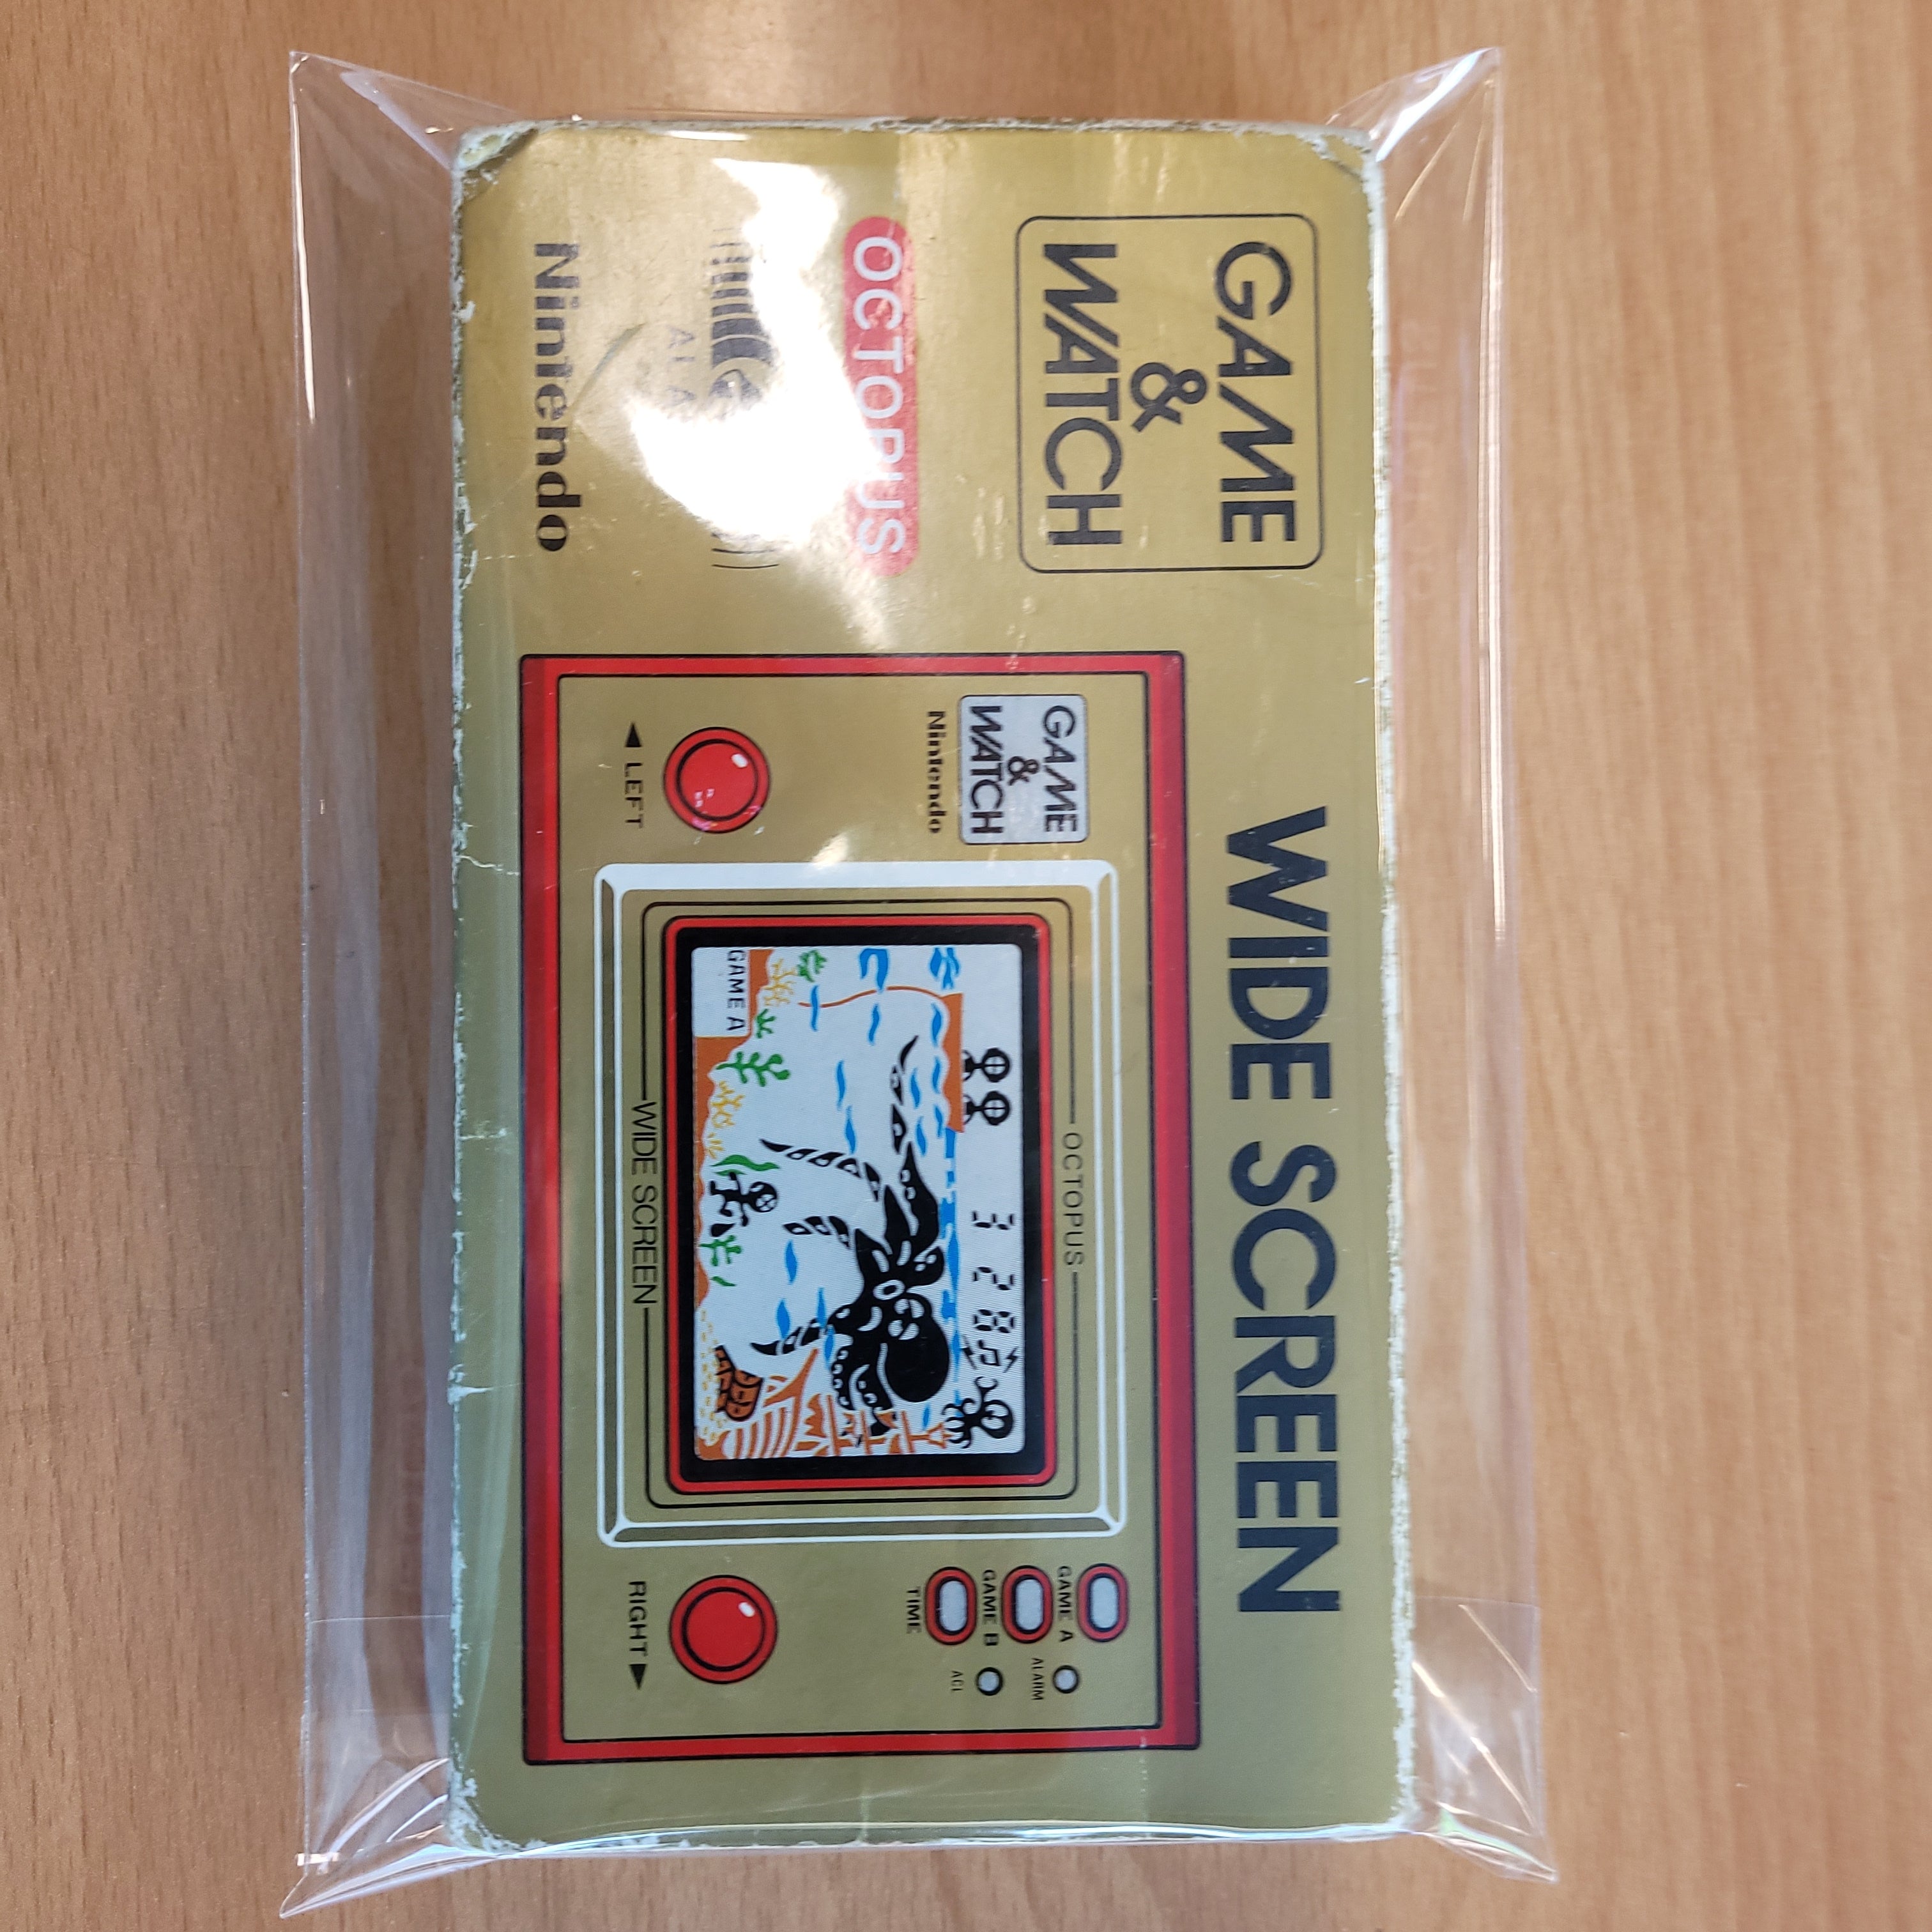 Game & Watch - Octopus CIB | All Aboard Games